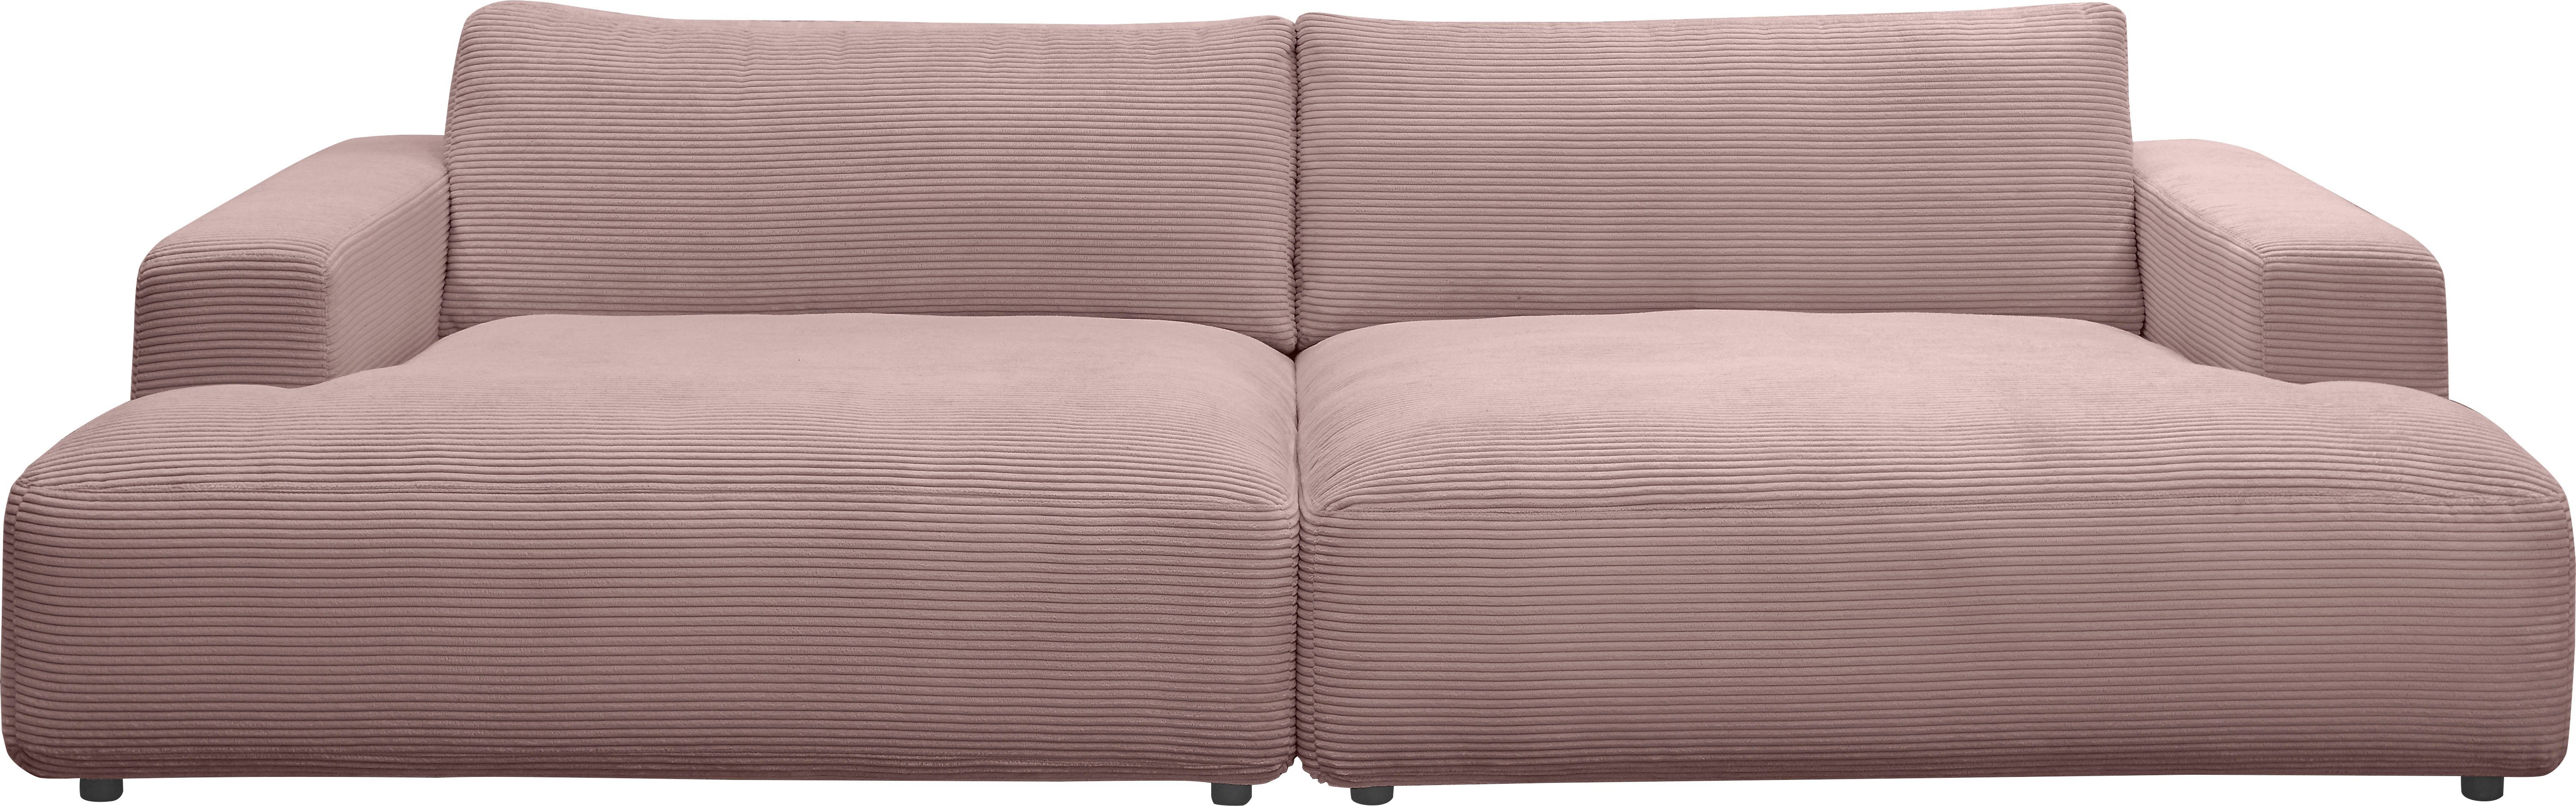 GALLERY M branded Cord-Bezug, by Breite 292 cm Musterring Loungesofa rosa Lucia